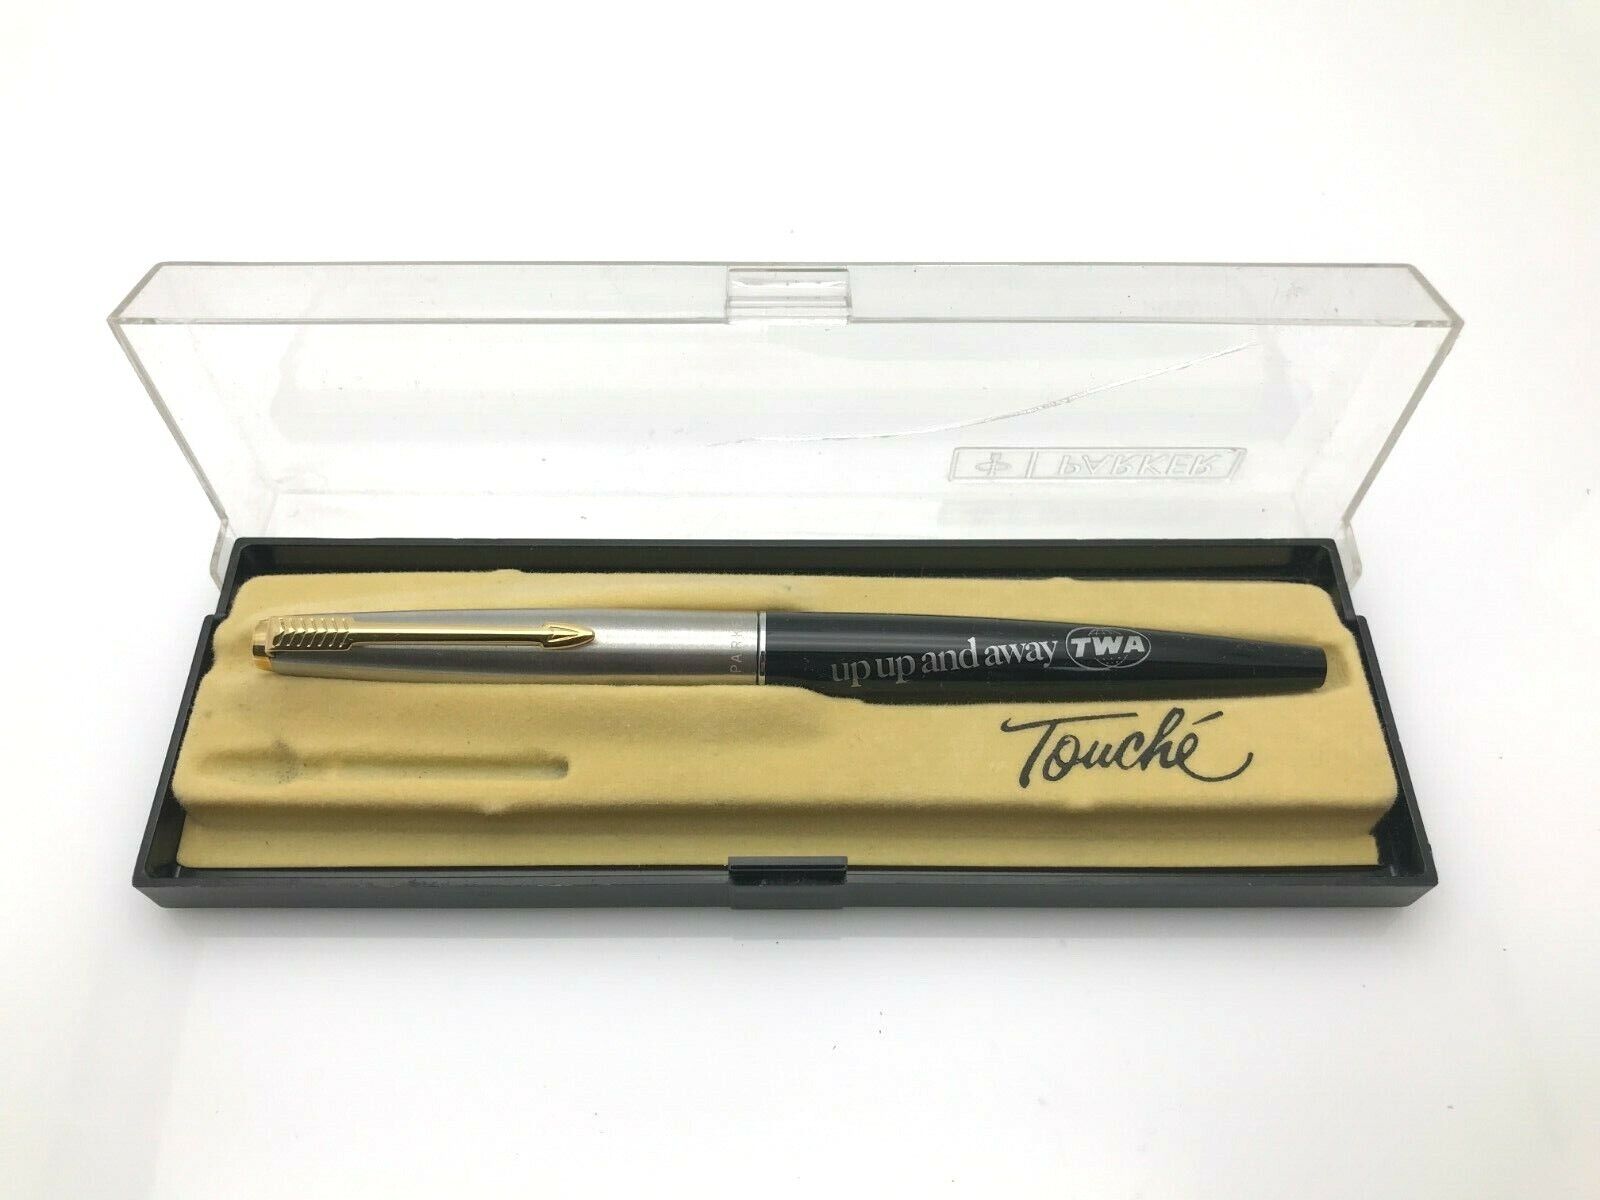 Vintage Parker Touche Pen TWA Airline Gift in Original Box Up Up and Away